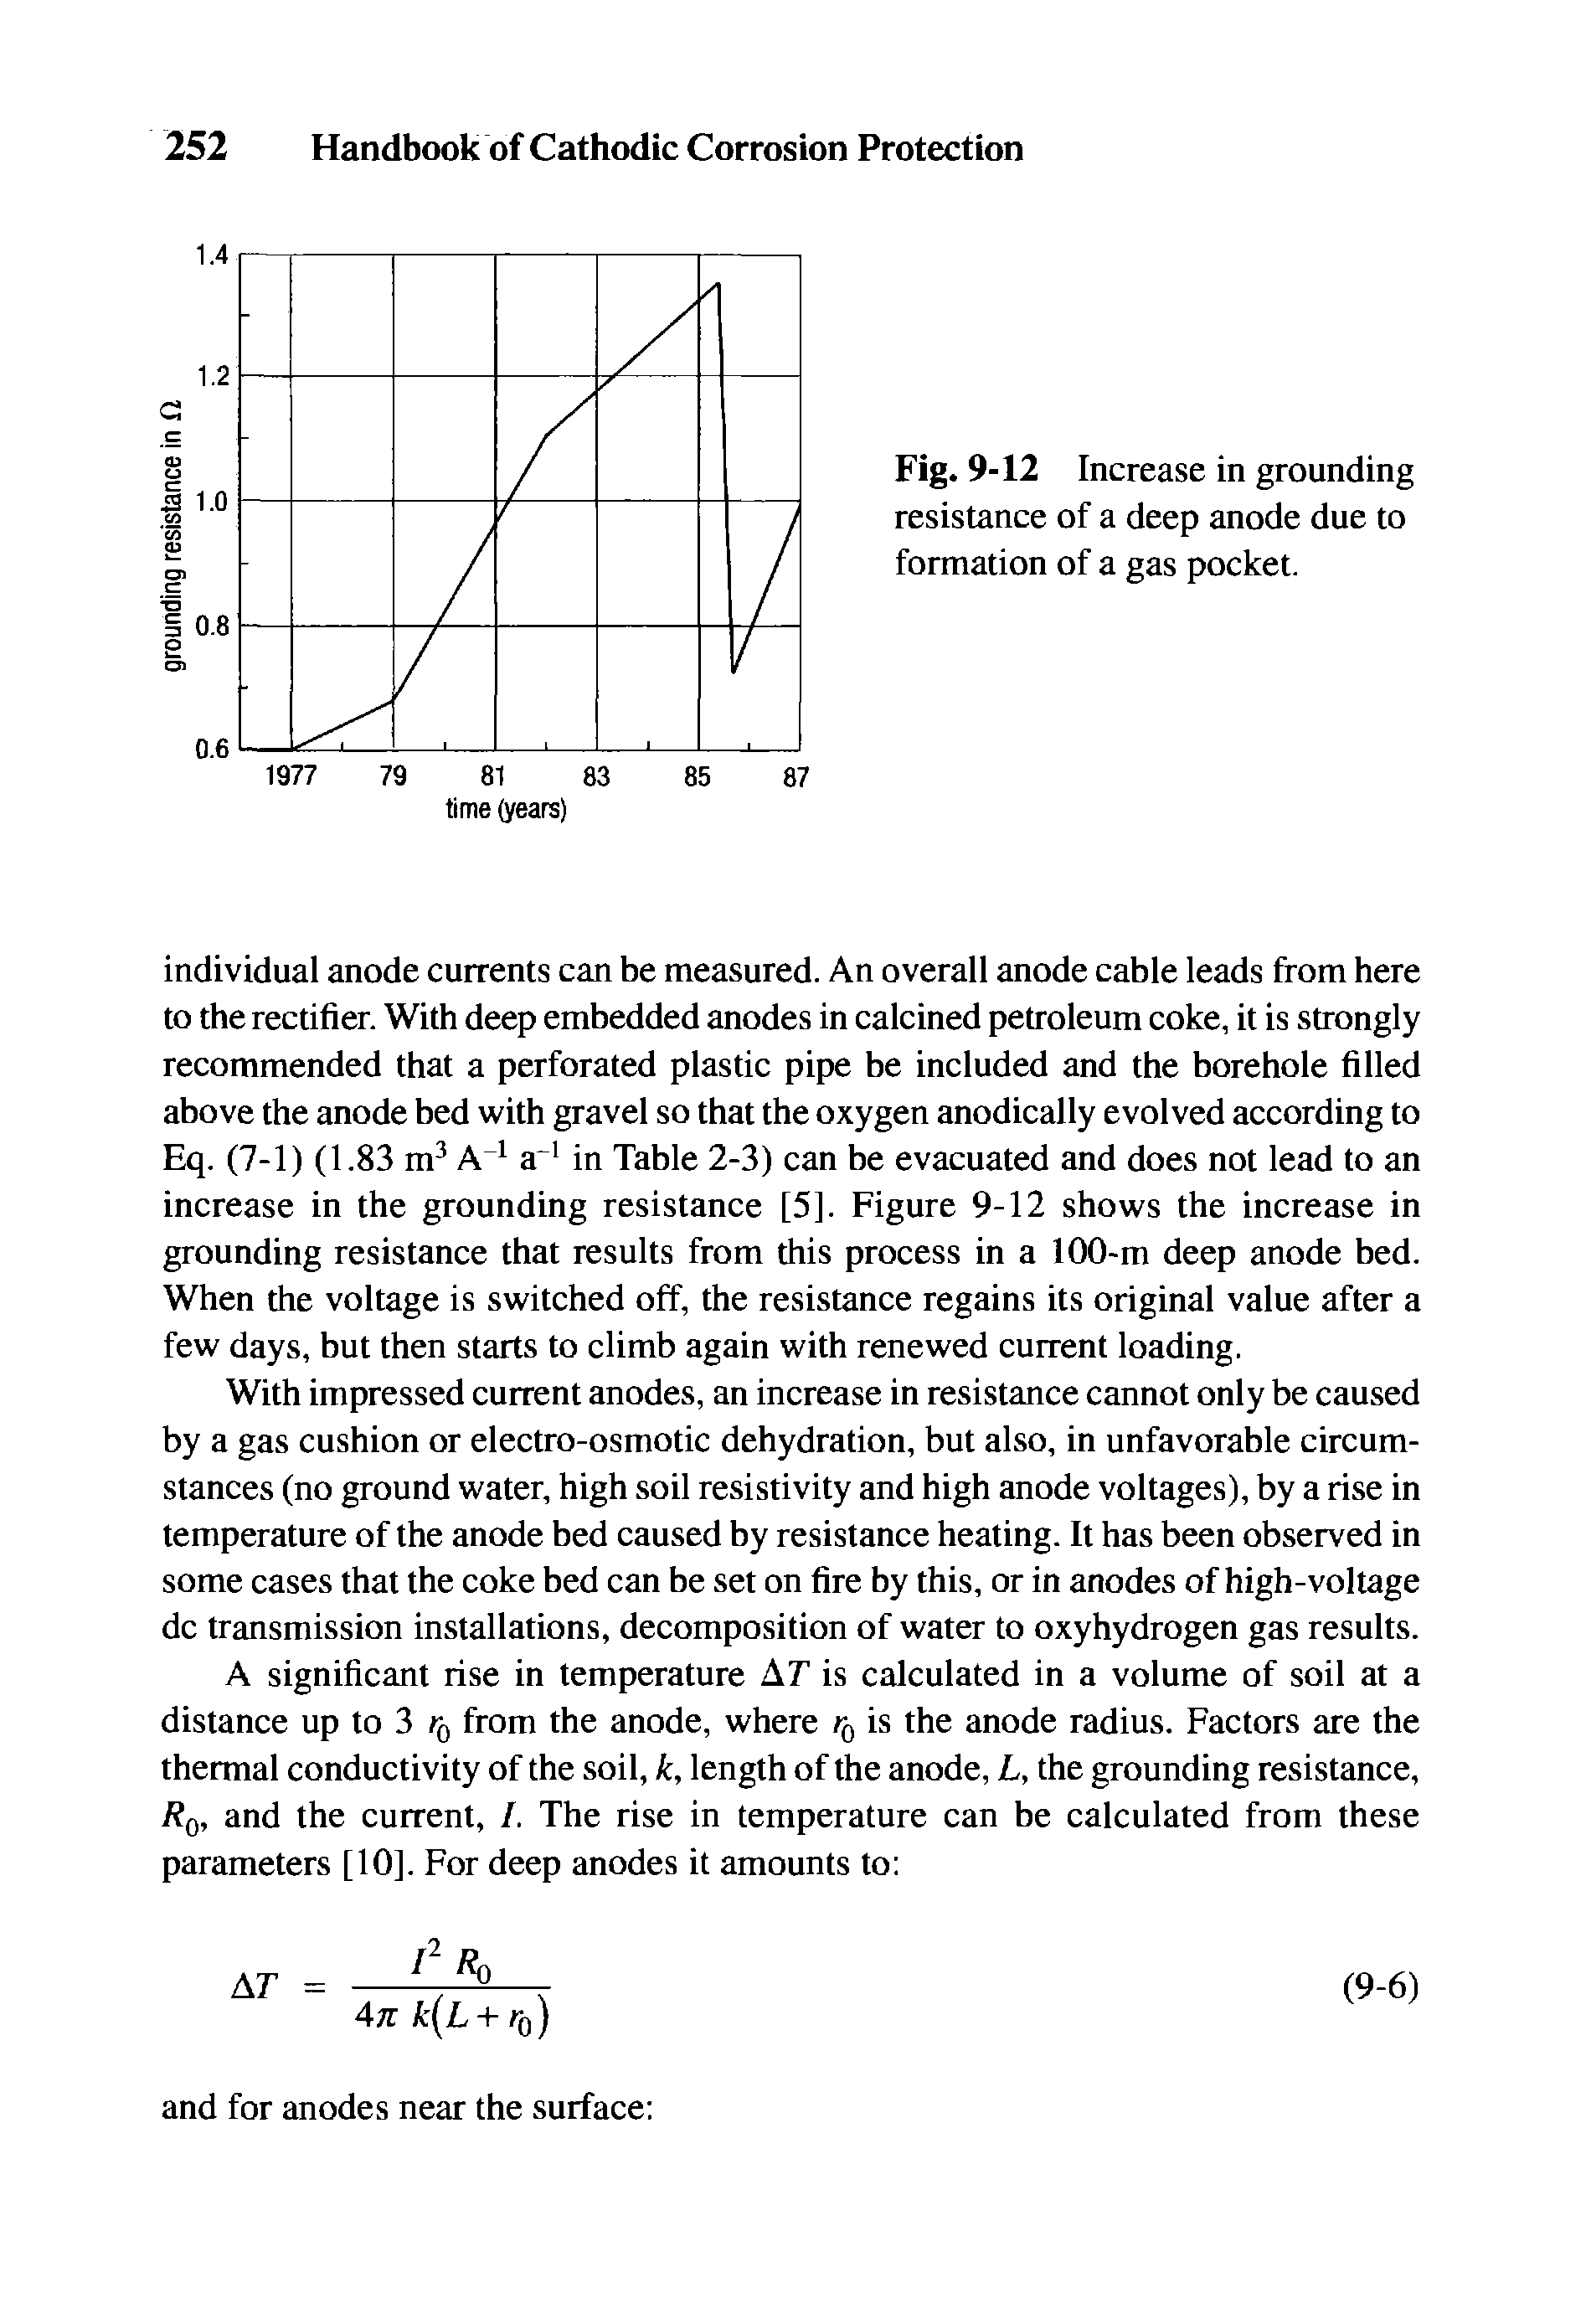 Fig. 9-12 Increase in grounding resistance of a deep anode due to formation of a gas pocket.